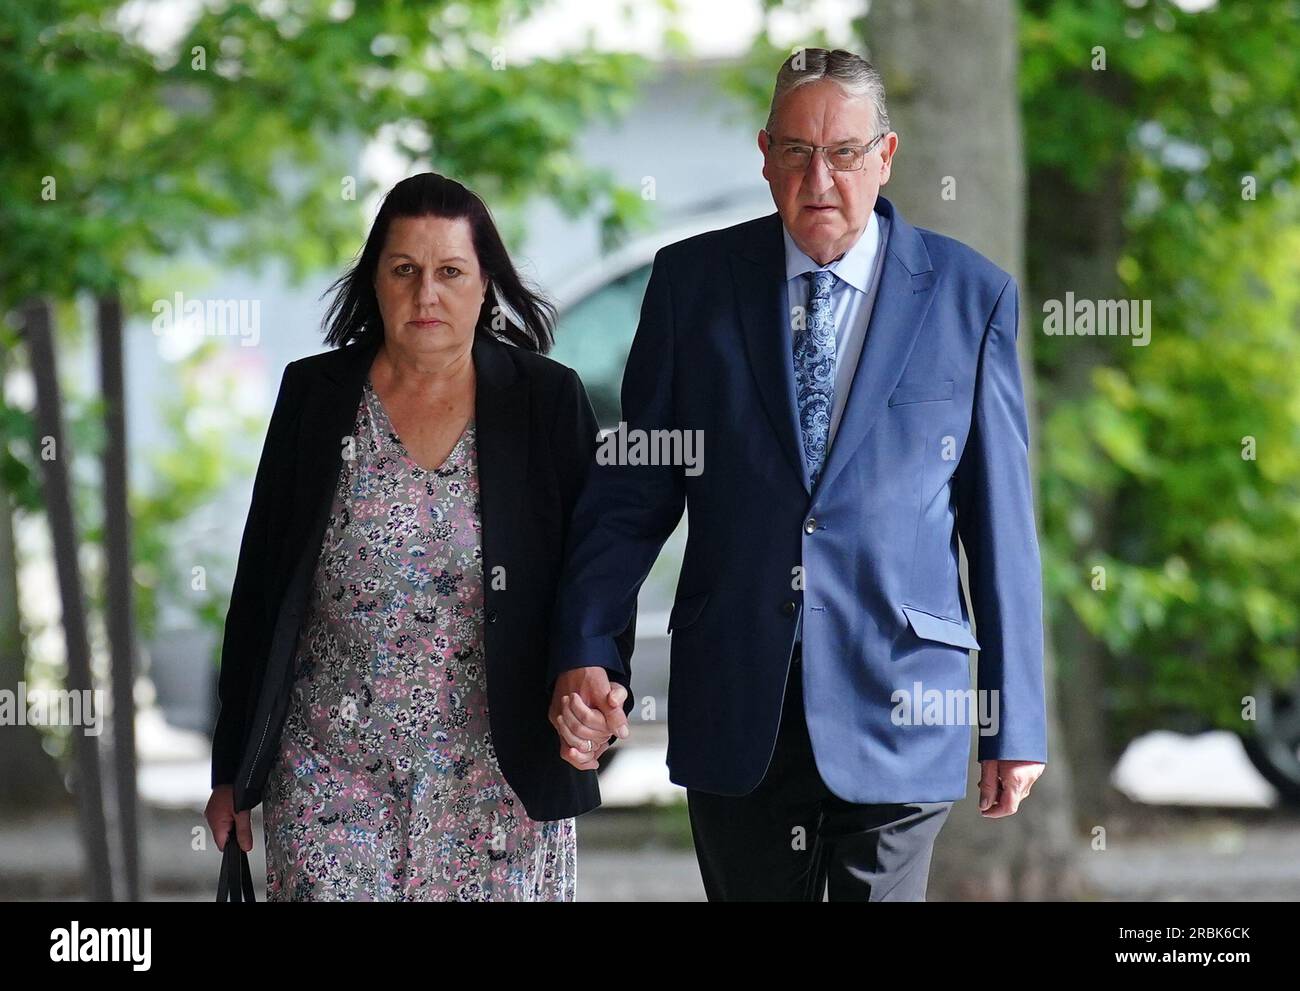 John and Susan Letby, the parents of nurse Lucy Letby, arrive at Manchester Crown Court ahead of the verdict in the of their daughter who is accused of the murder of seven babies and the attempted murder of another ten, between June 2015 and June 2016 while working on the neonatal unit of the Countess of Chester Hospital. Picture date: Monday July 10, 2023. Stock Photo